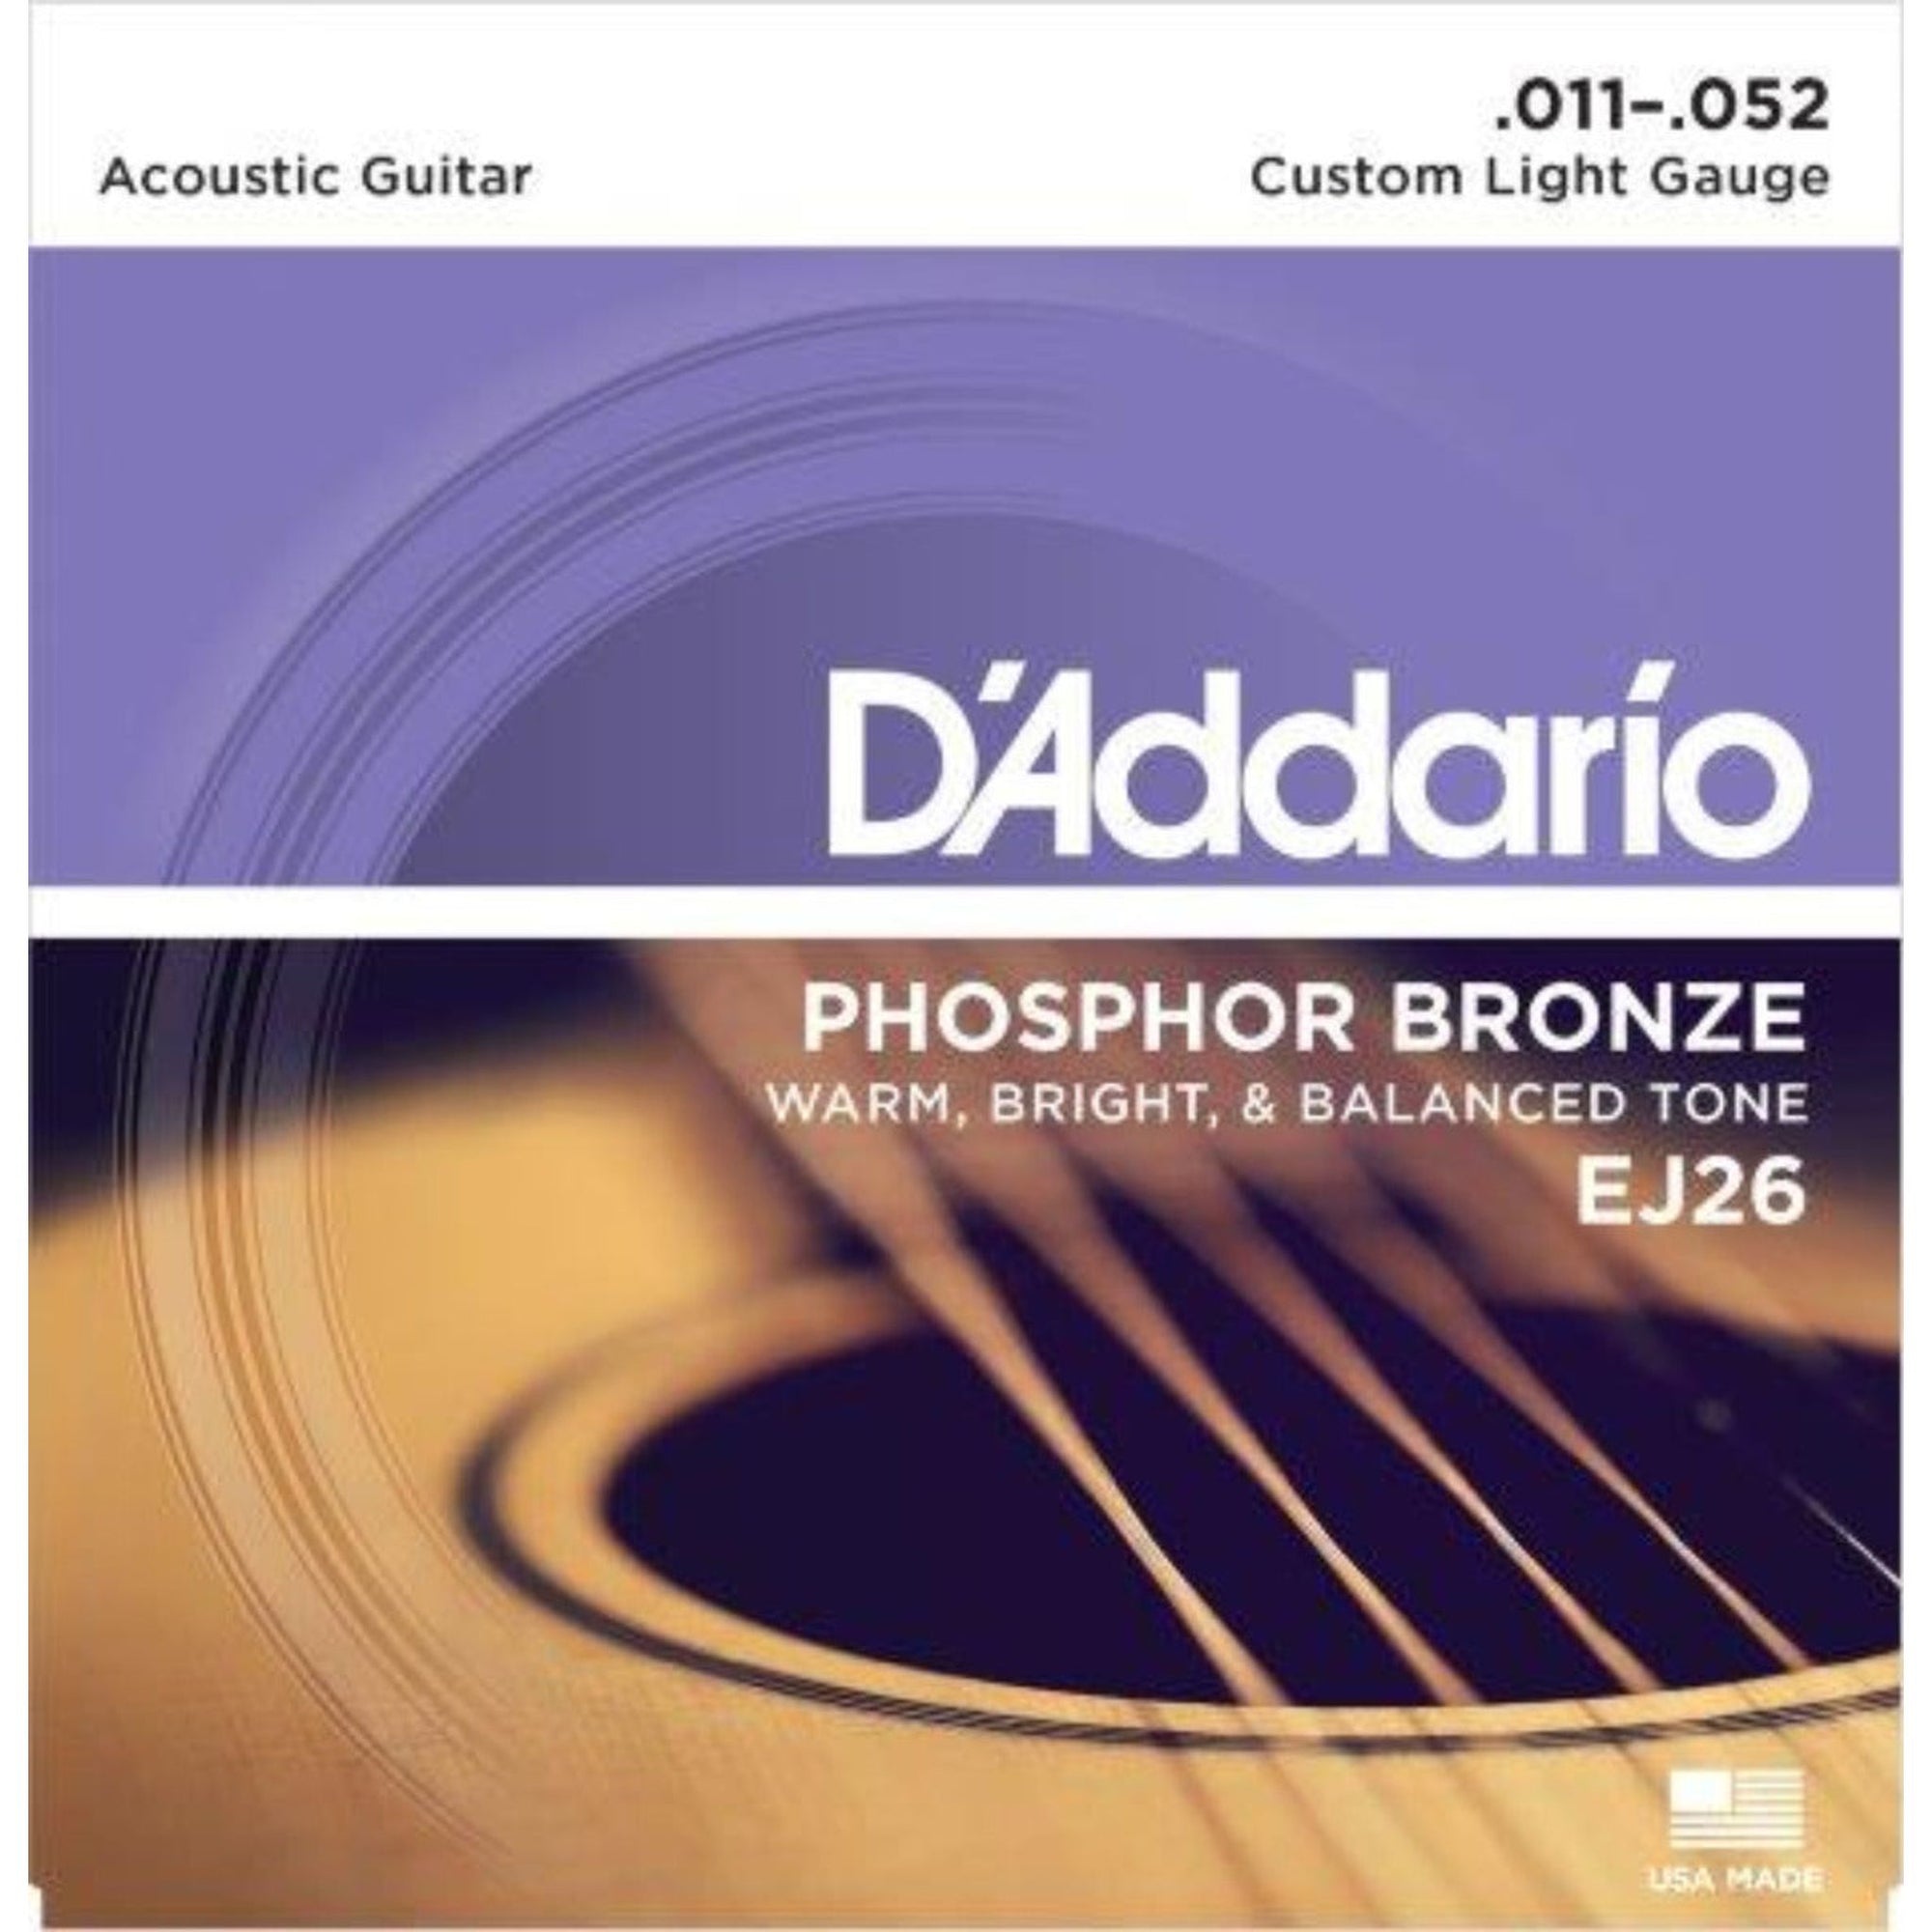 Referred to as Custom Light, EJ26 strings are a D'Addario original hybrid gauge and a comfortable compromise for players who want the depth and projection of light gauge bottom strings, but slightly less tension on the high strings for easy bending.